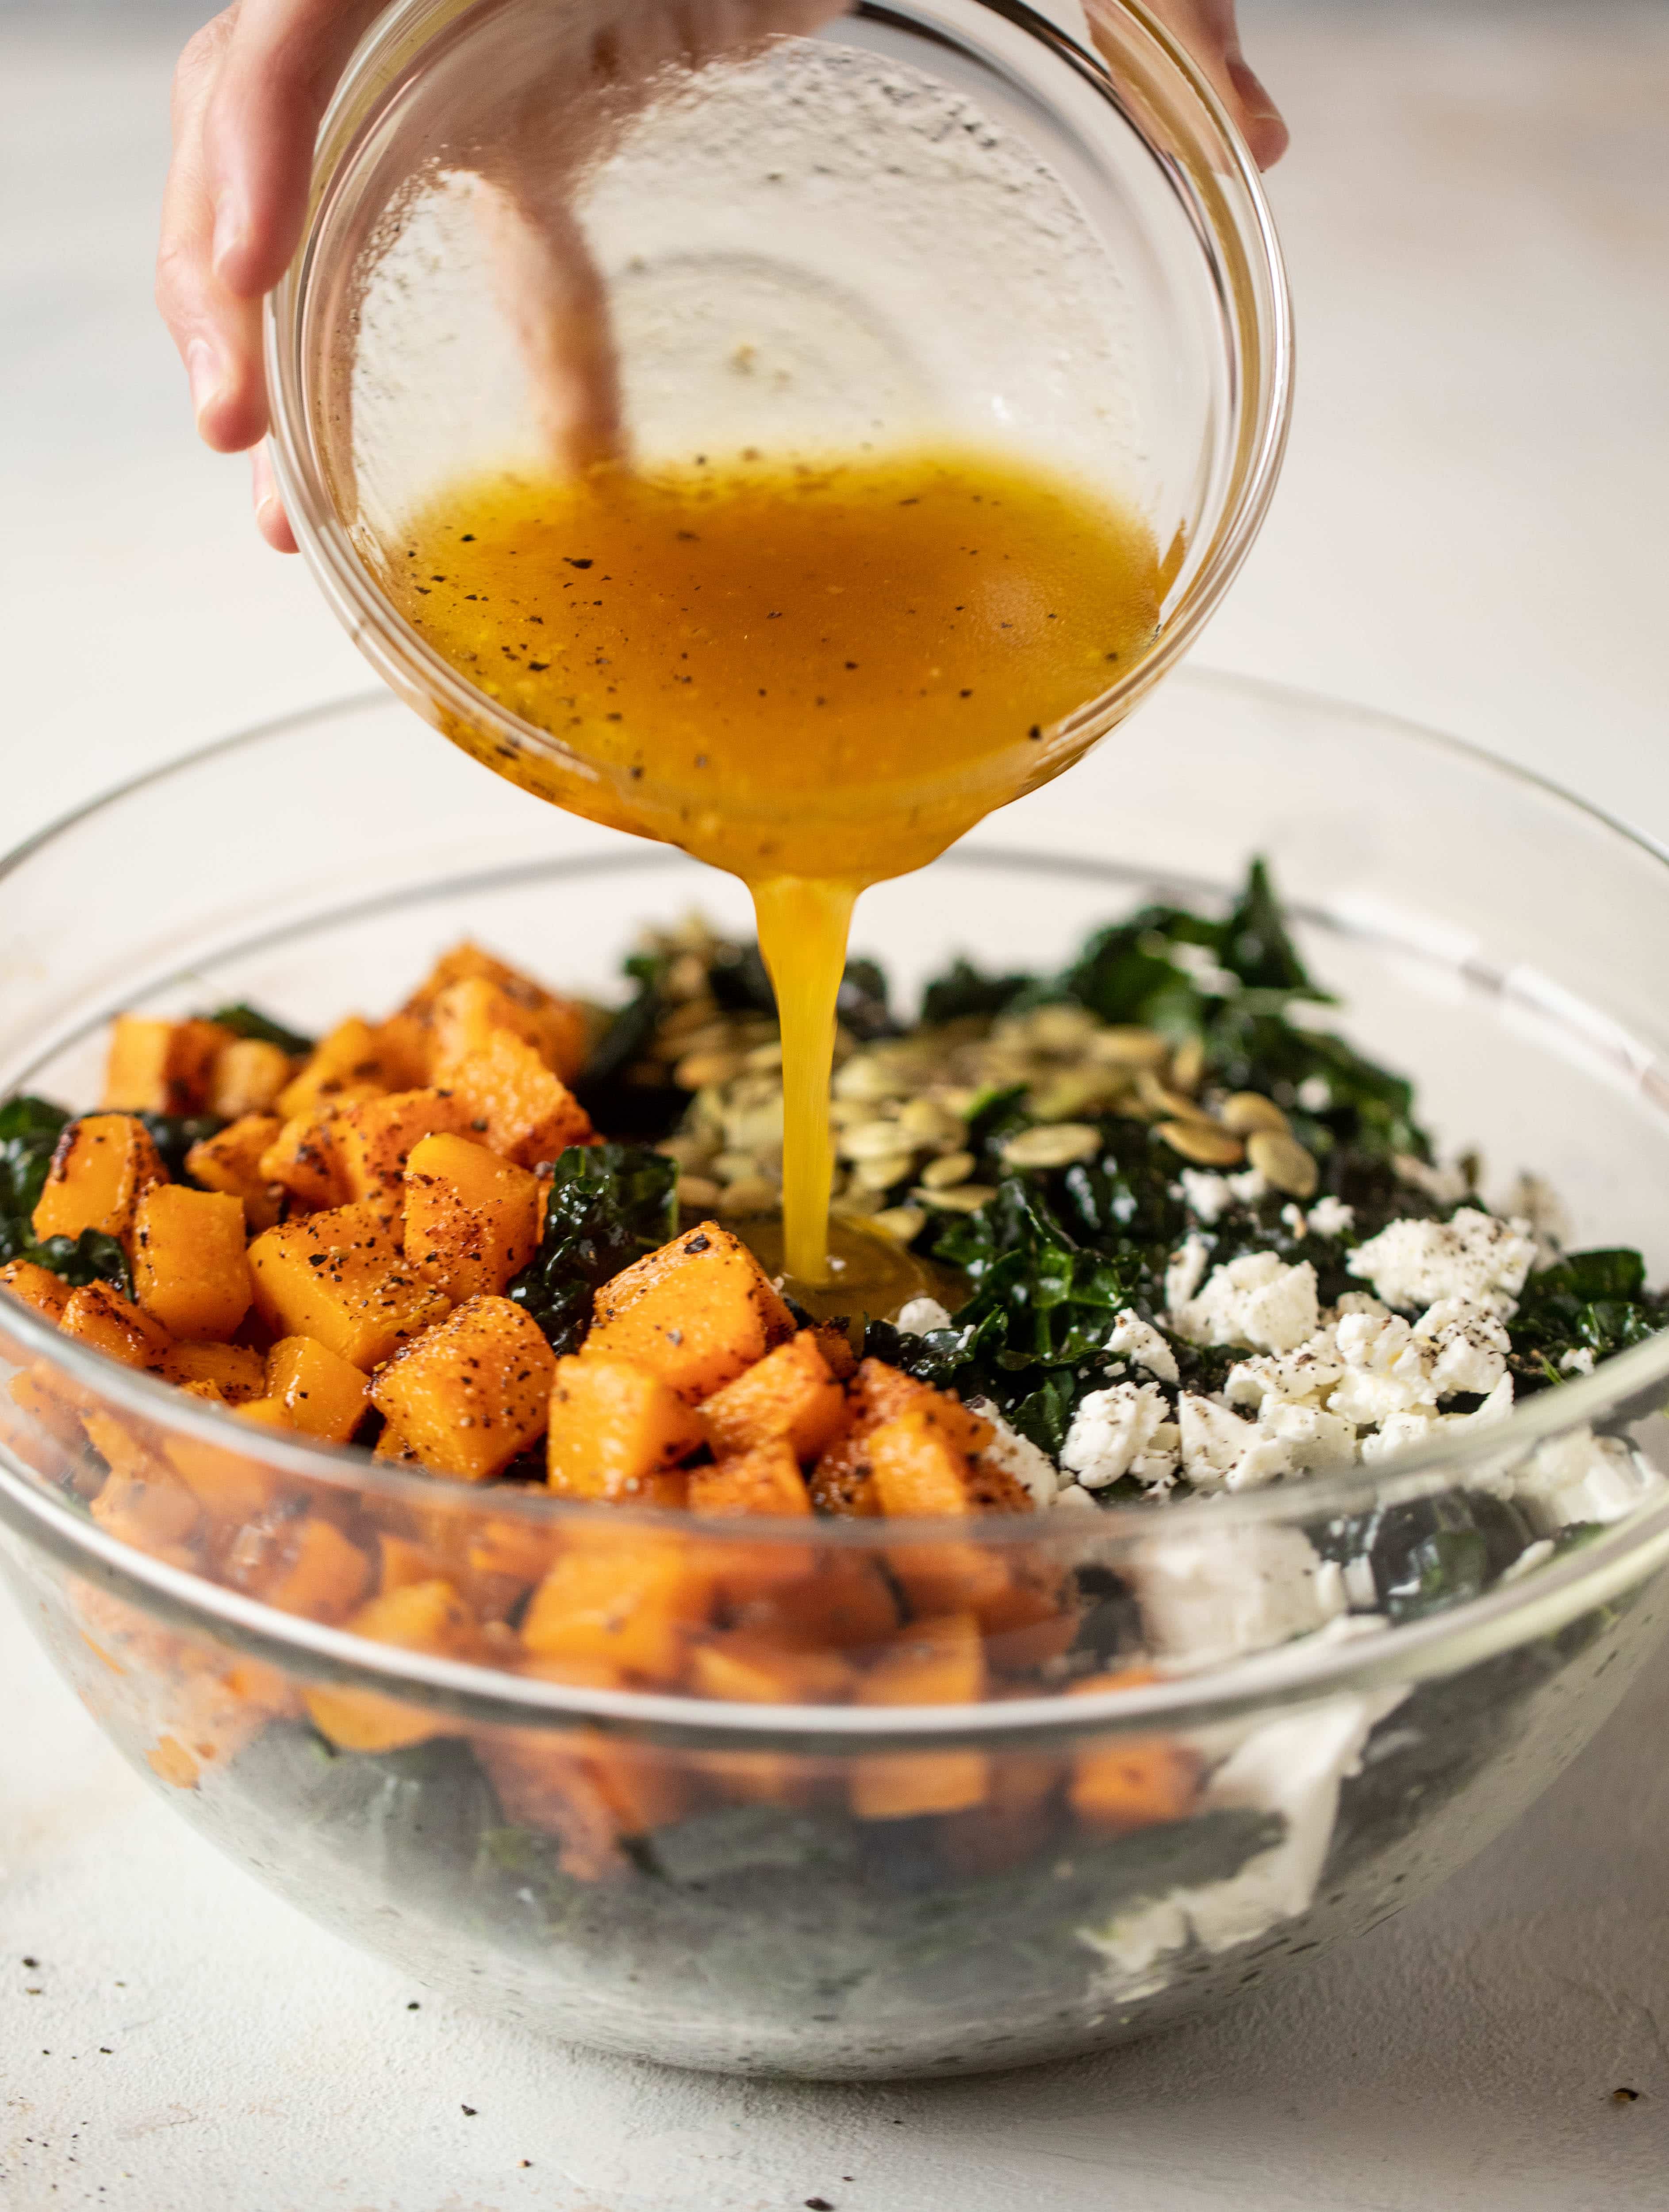 This butternut squash kale salad is so easy and delicious! Roasted, smoky butternut squash, goat cheese, pepitas and apricot vinaigrette.